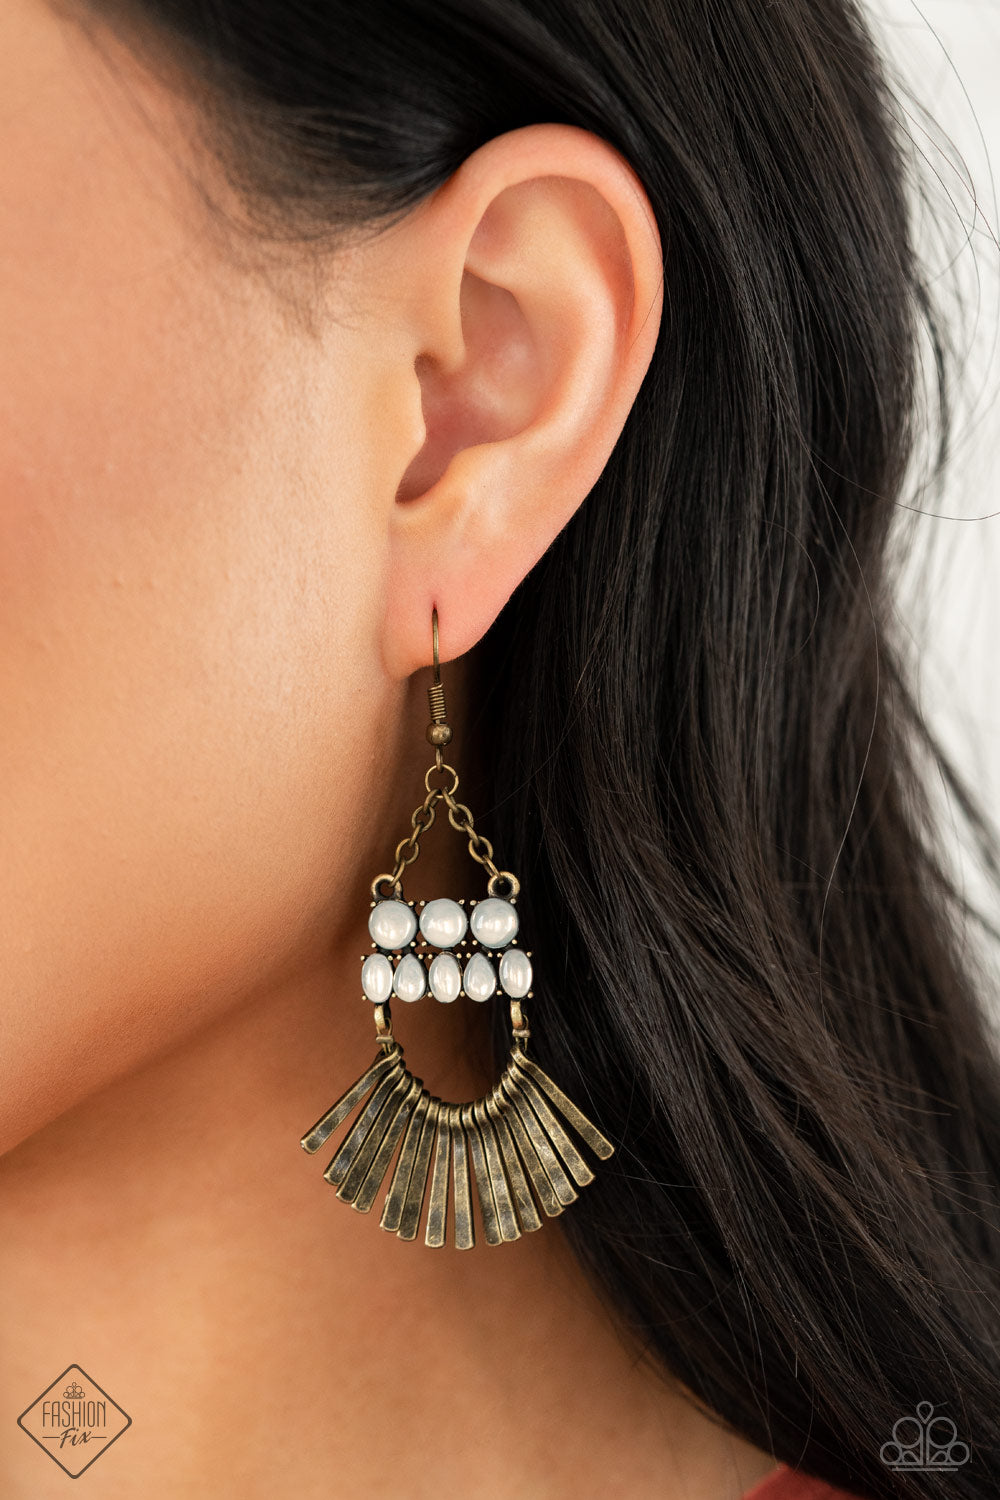 A FLARE For Fierceness - Brass Earrings May 2021 Fashion Fix Exclusive - Princess Glam Shop